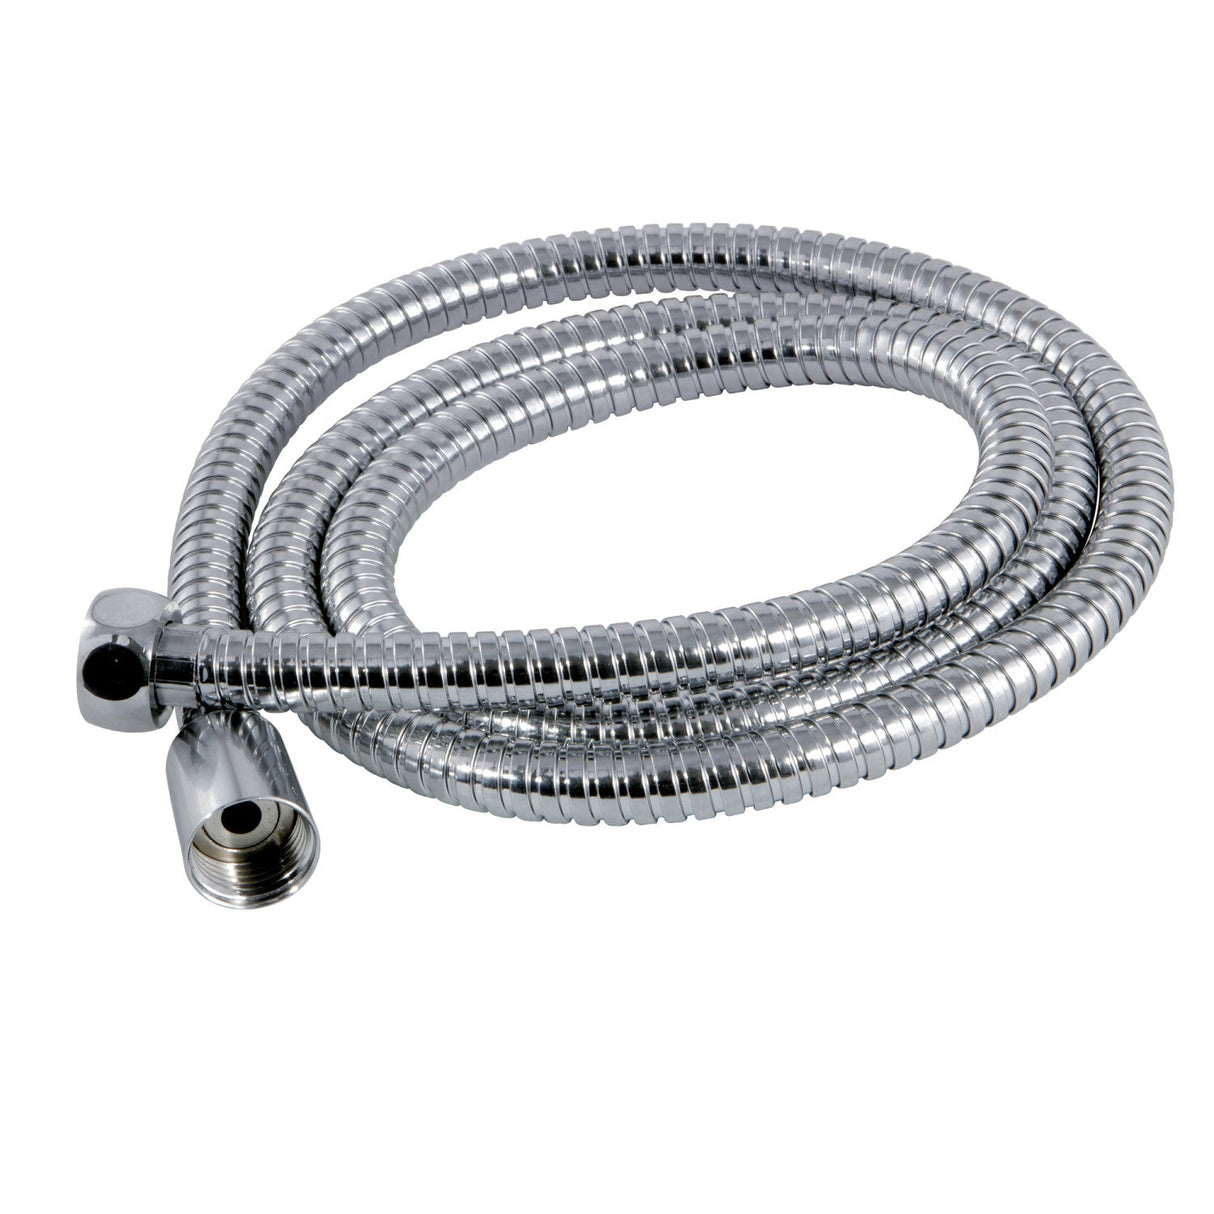 Vintage ABT1030A1 59-Inch Stainless Steel Shower Hose, Polished Chrome